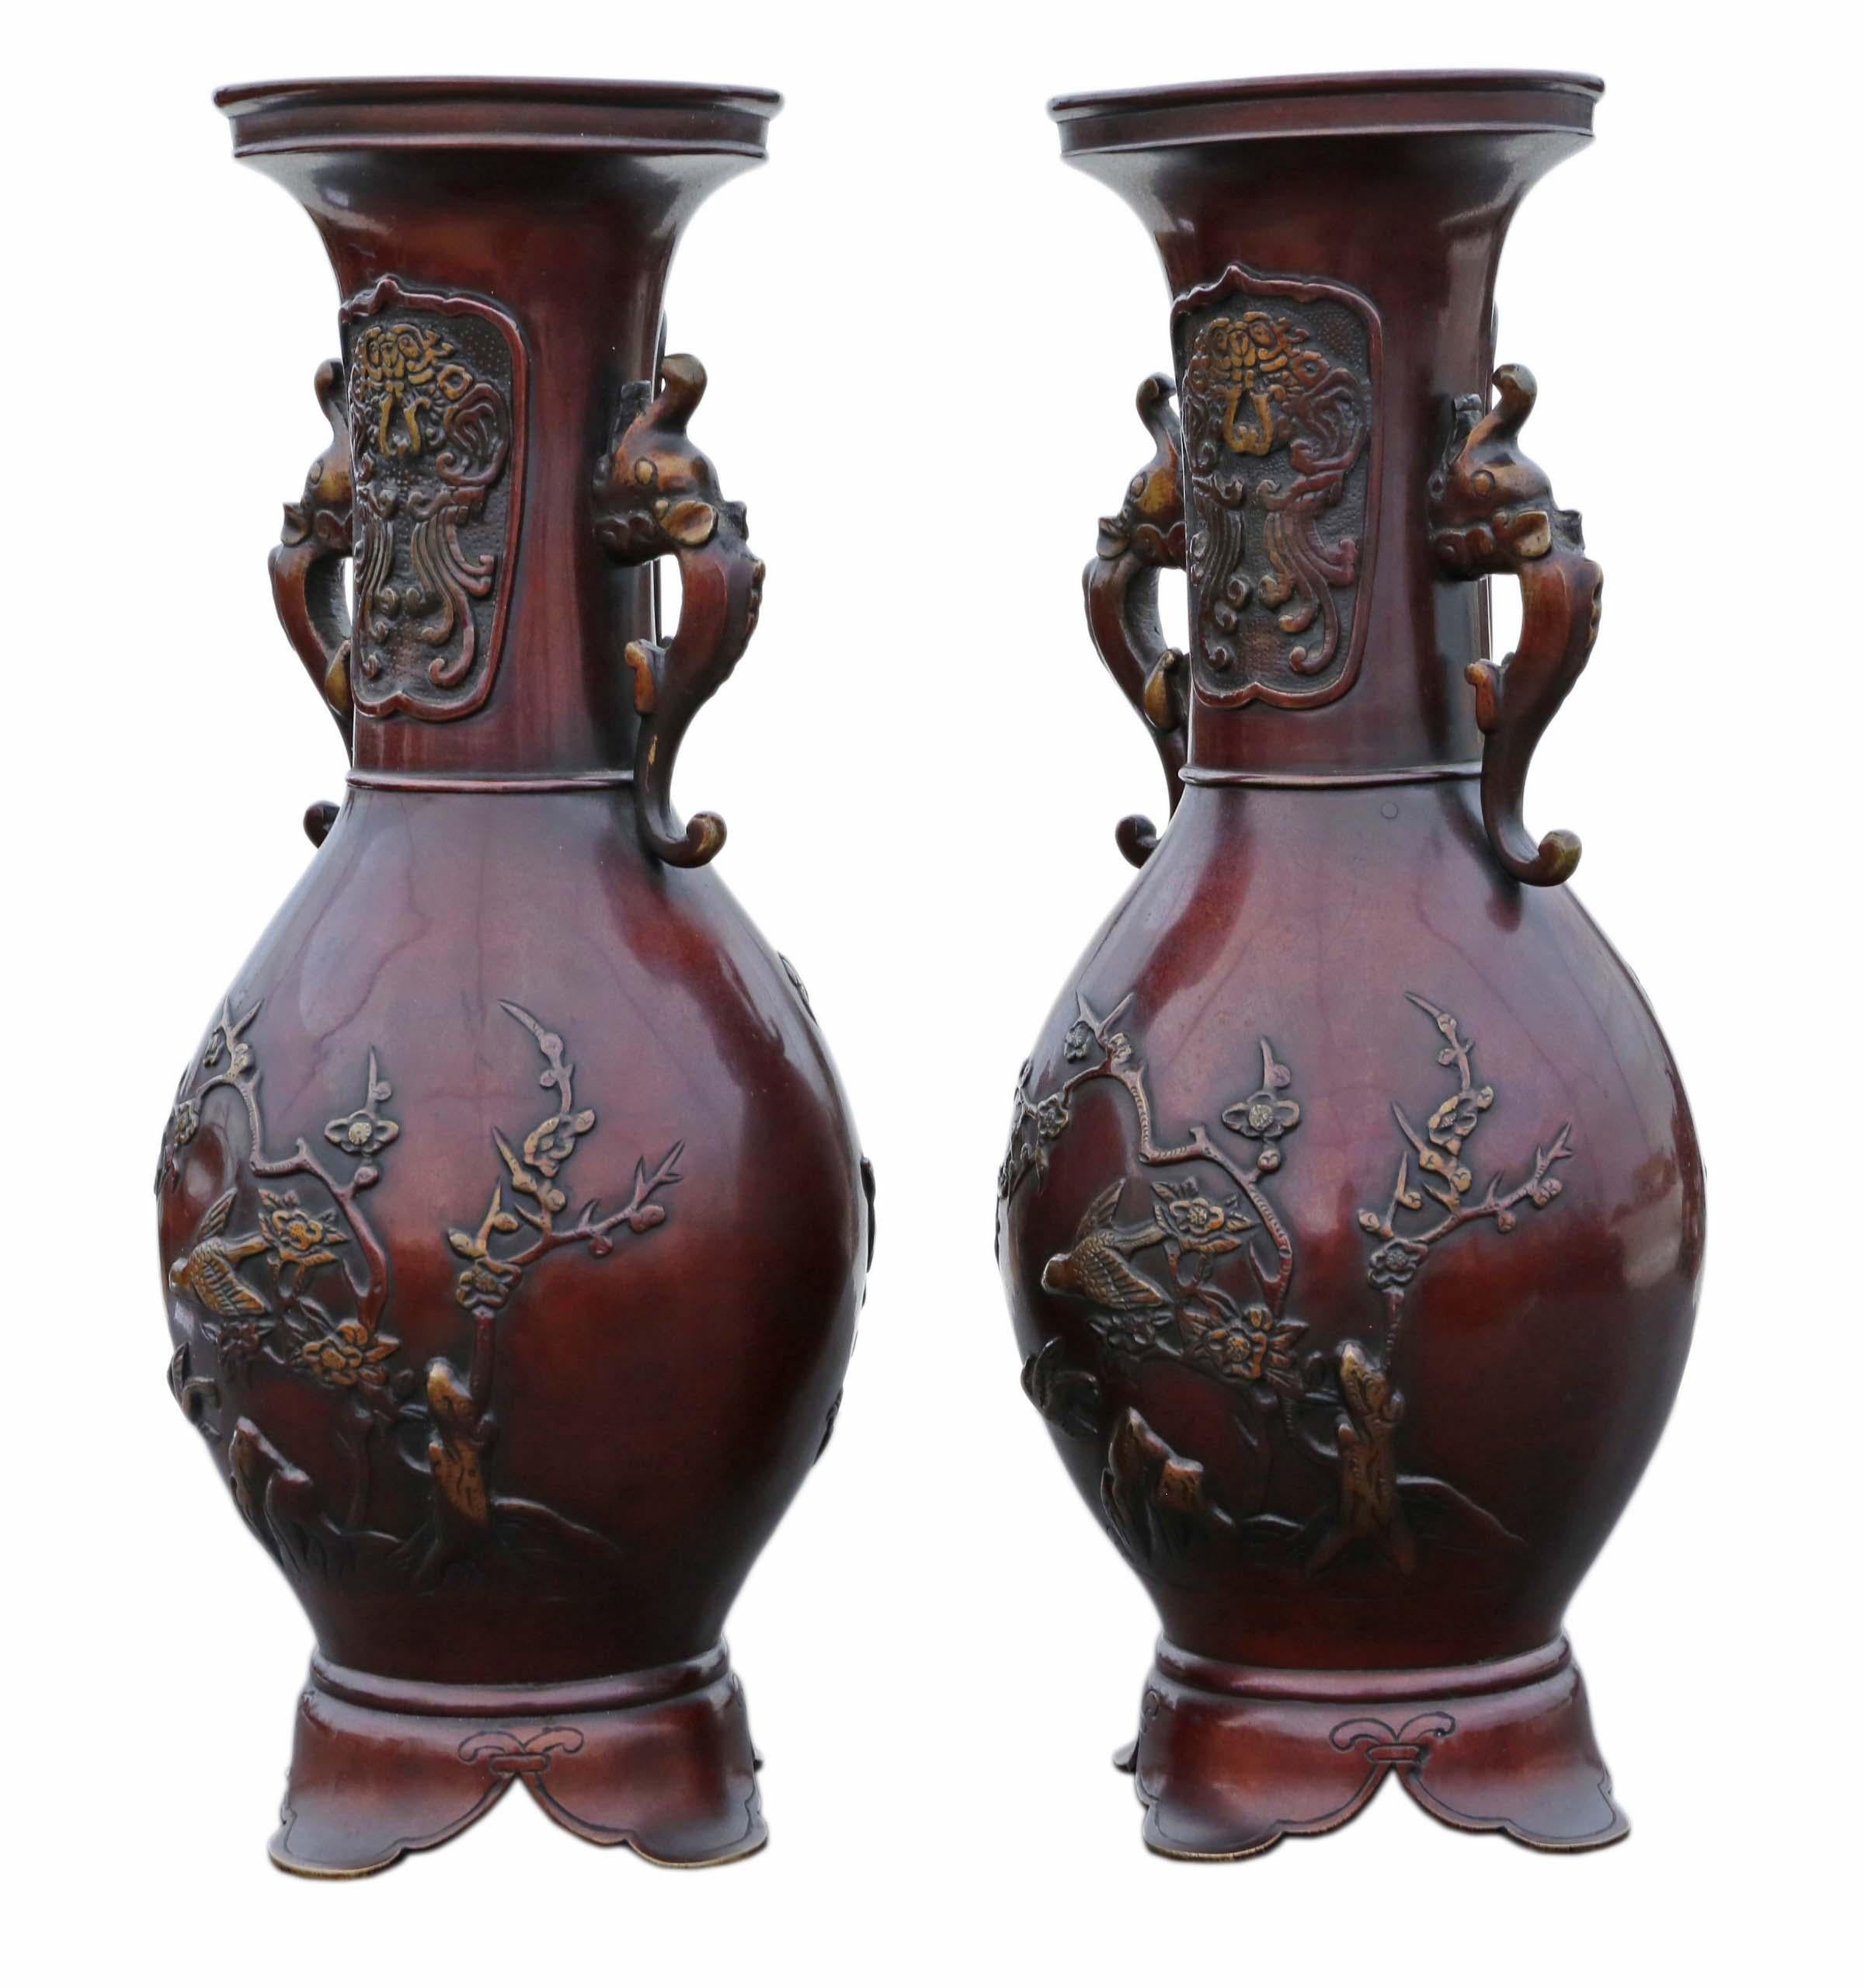 Antique Very Large Pair of Japanese Bronze Vases Meiji Period In Good Condition For Sale In Wisbech, Cambridgeshire